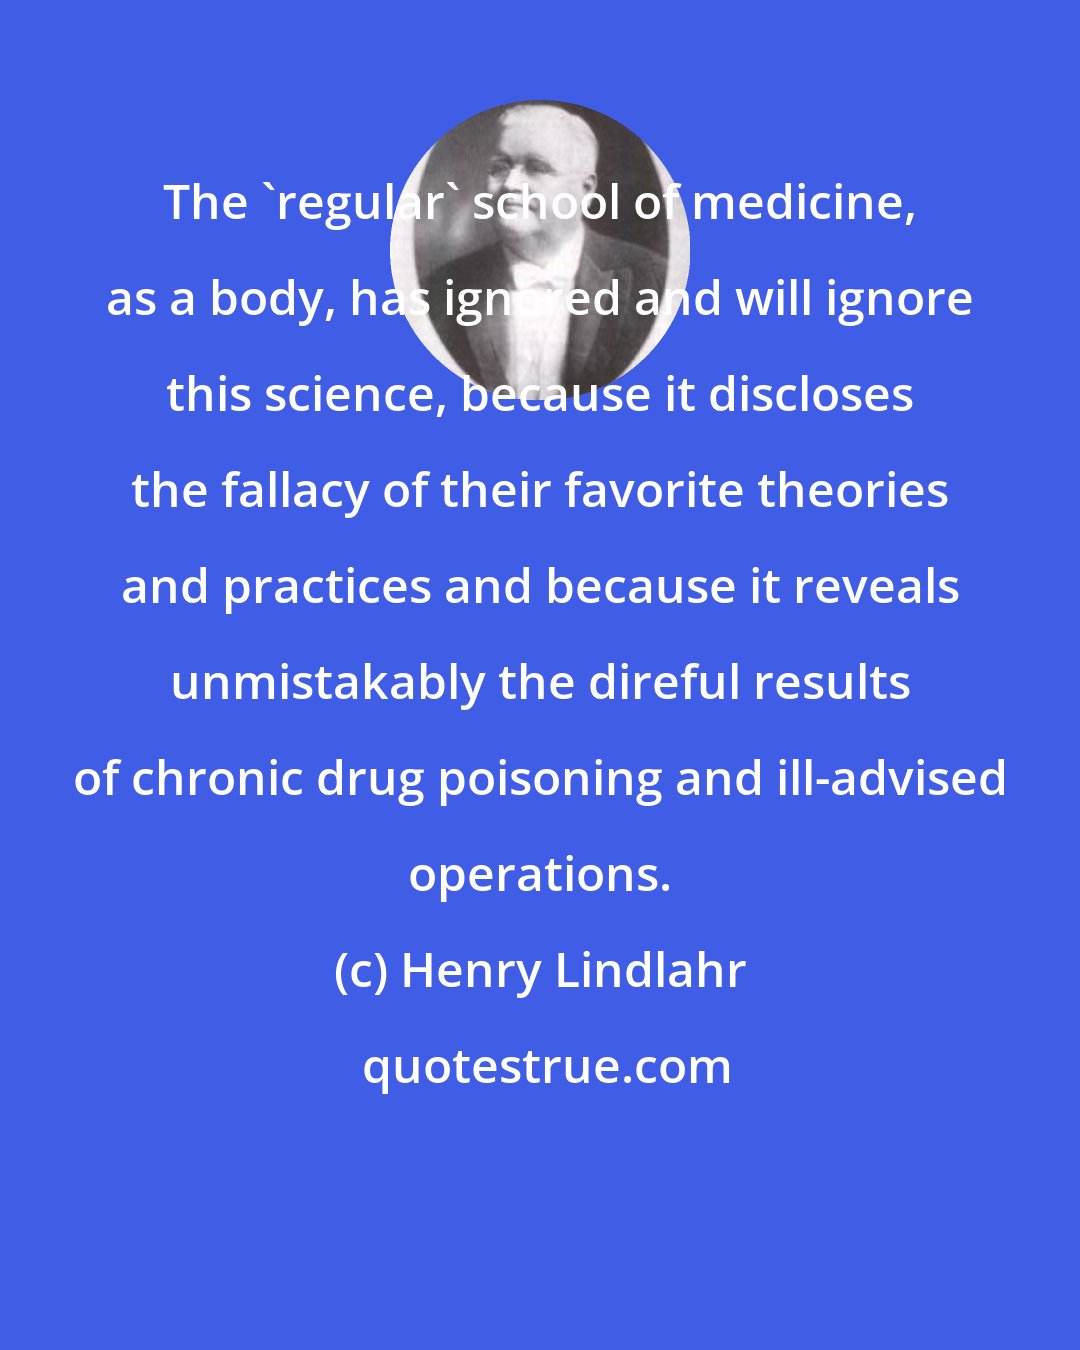 Henry Lindlahr: The 'regular' school of medicine, as a body, has ignored and will ignore this science, because it discloses the fallacy of their favorite theories and practices and because it reveals unmistakably the direful results of chronic drug poisoning and ill-advised operations.